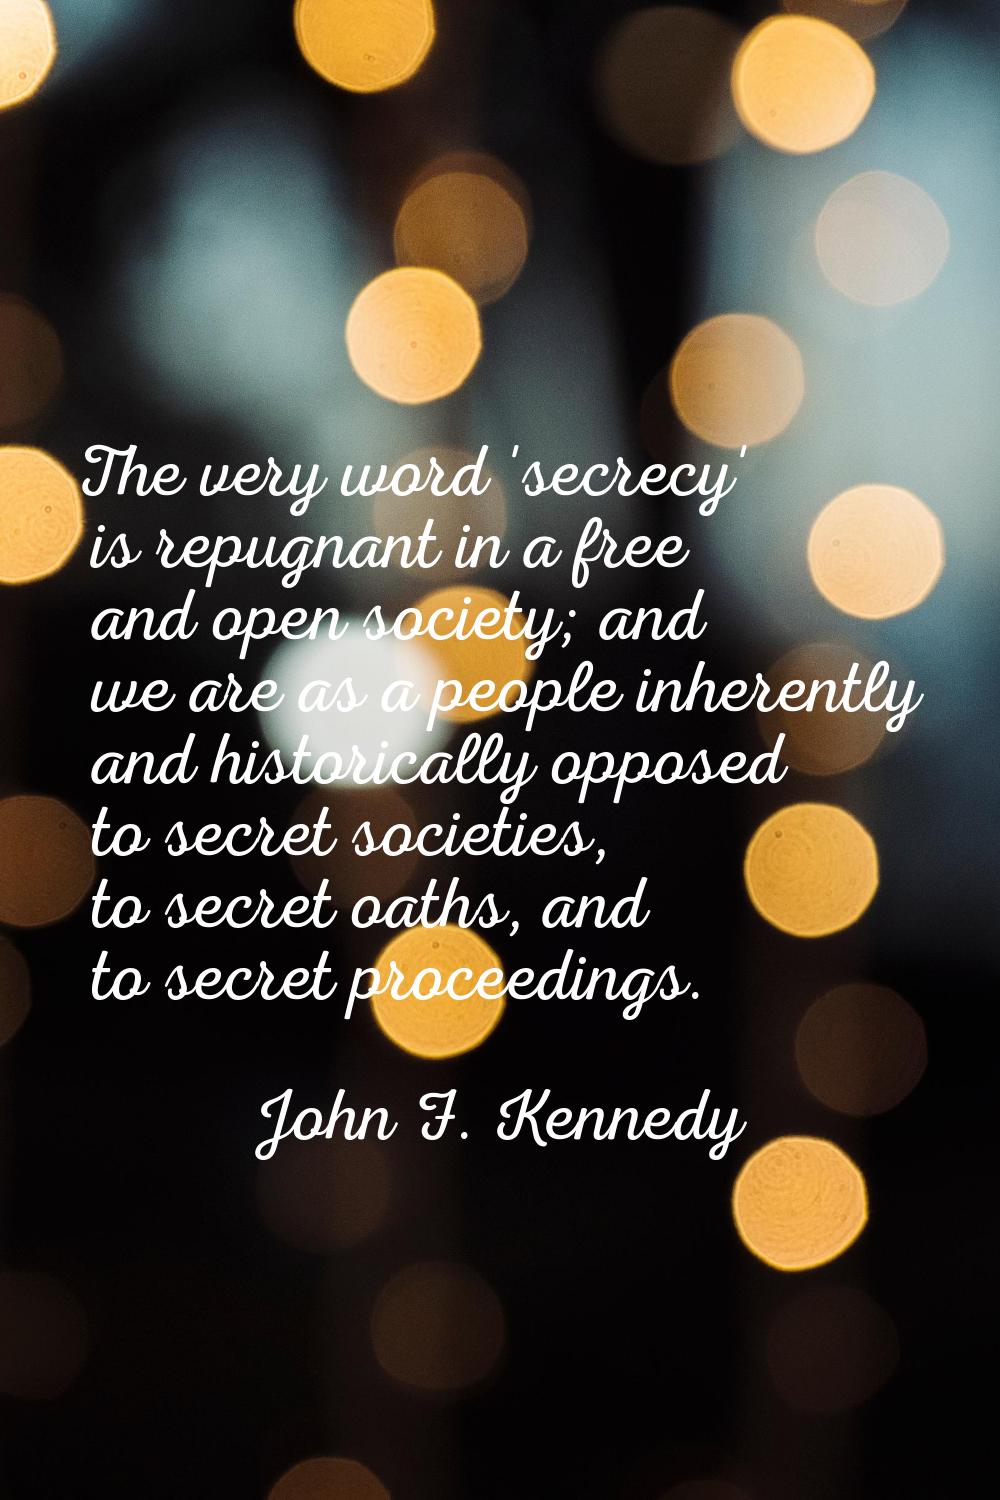 The very word 'secrecy' is repugnant in a free and open society; and we are as a people inherently 